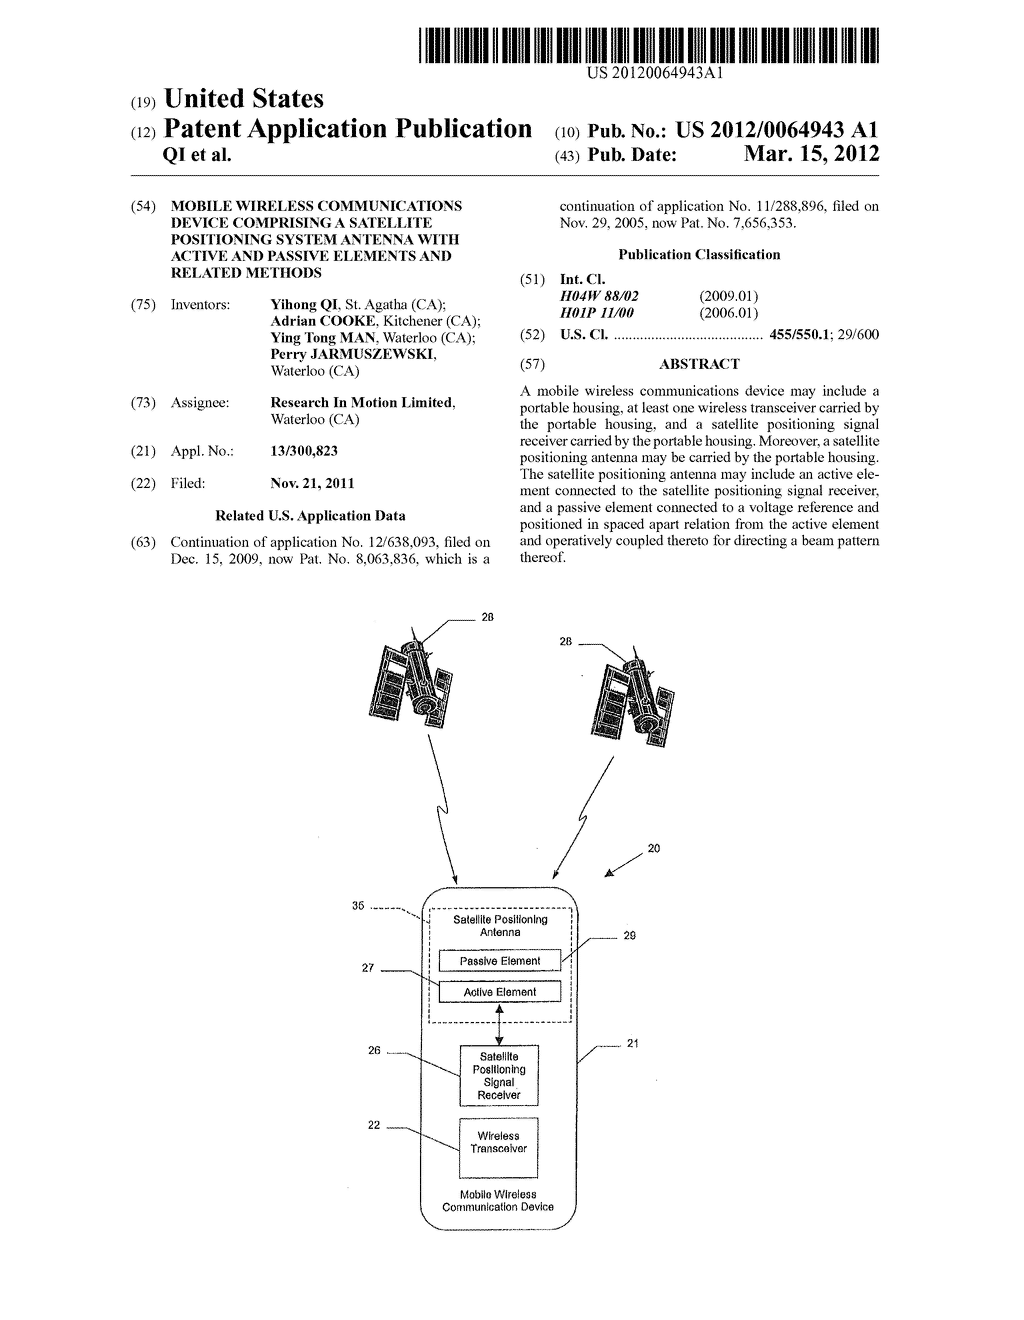 MOBILE WIRELESS COMMUNICATIONS DEVICE COMPRISING A SATELLITE POSITIONING     SYSTEM ANTENNA WITH ACTIVE AND PASSIVE ELEMENTS AND RELATED METHODS - diagram, schematic, and image 01